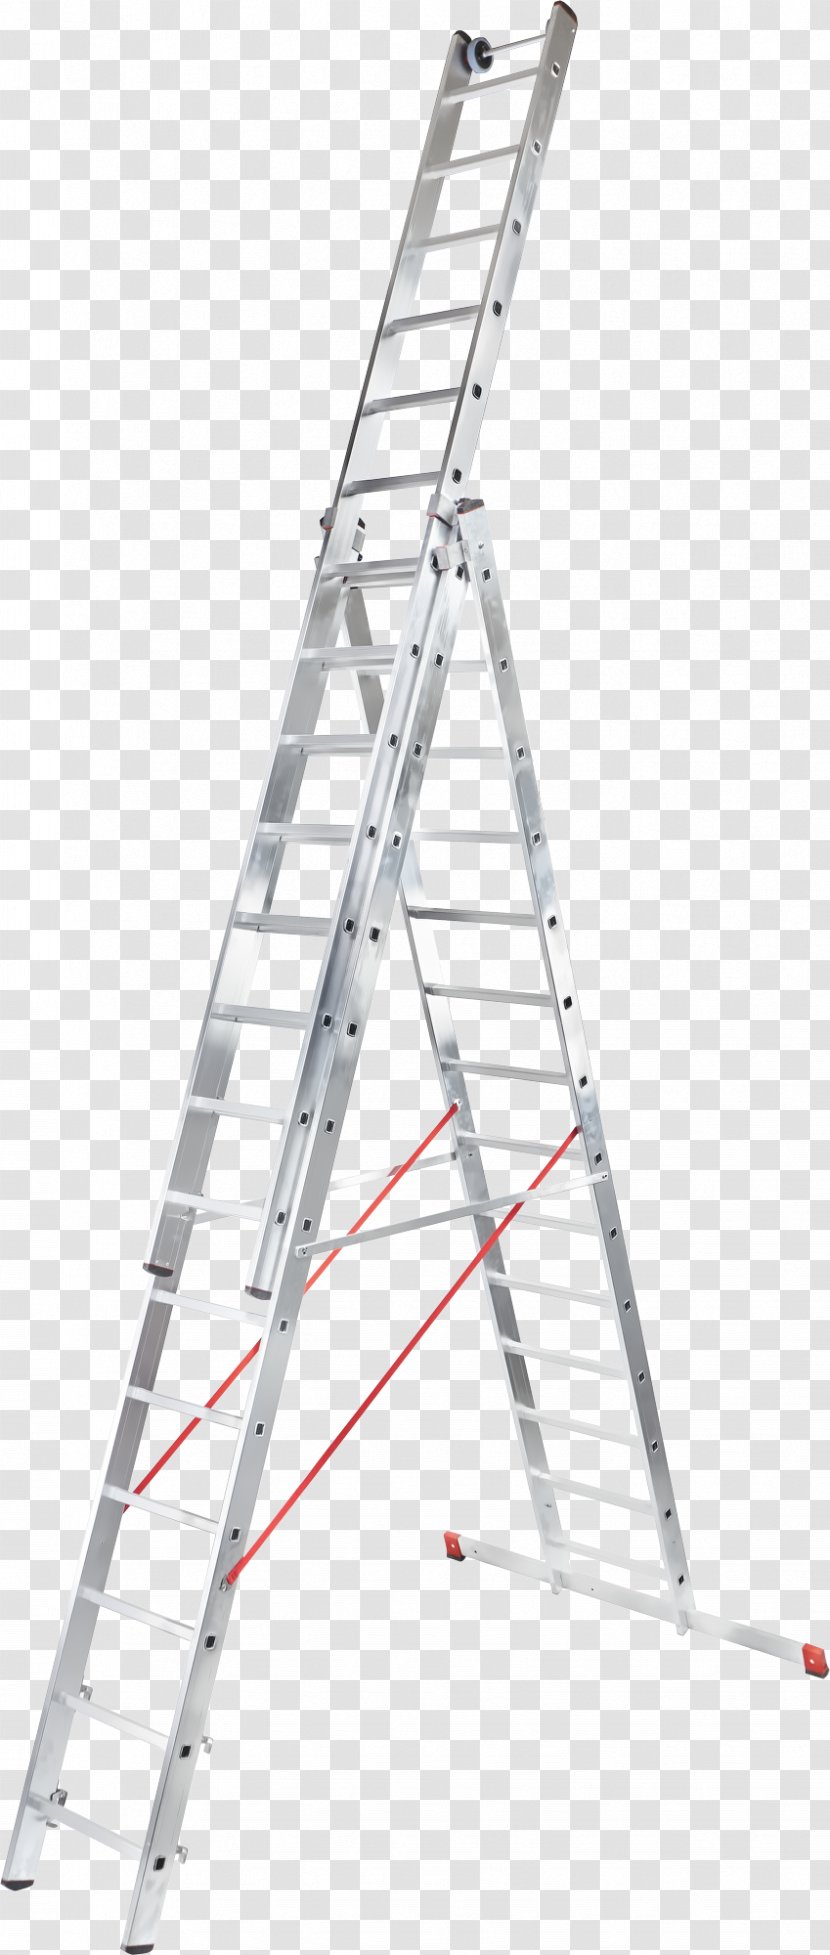 Stairs Ladder Stair Riser Architectural Engineering Sales - Height Transparent PNG